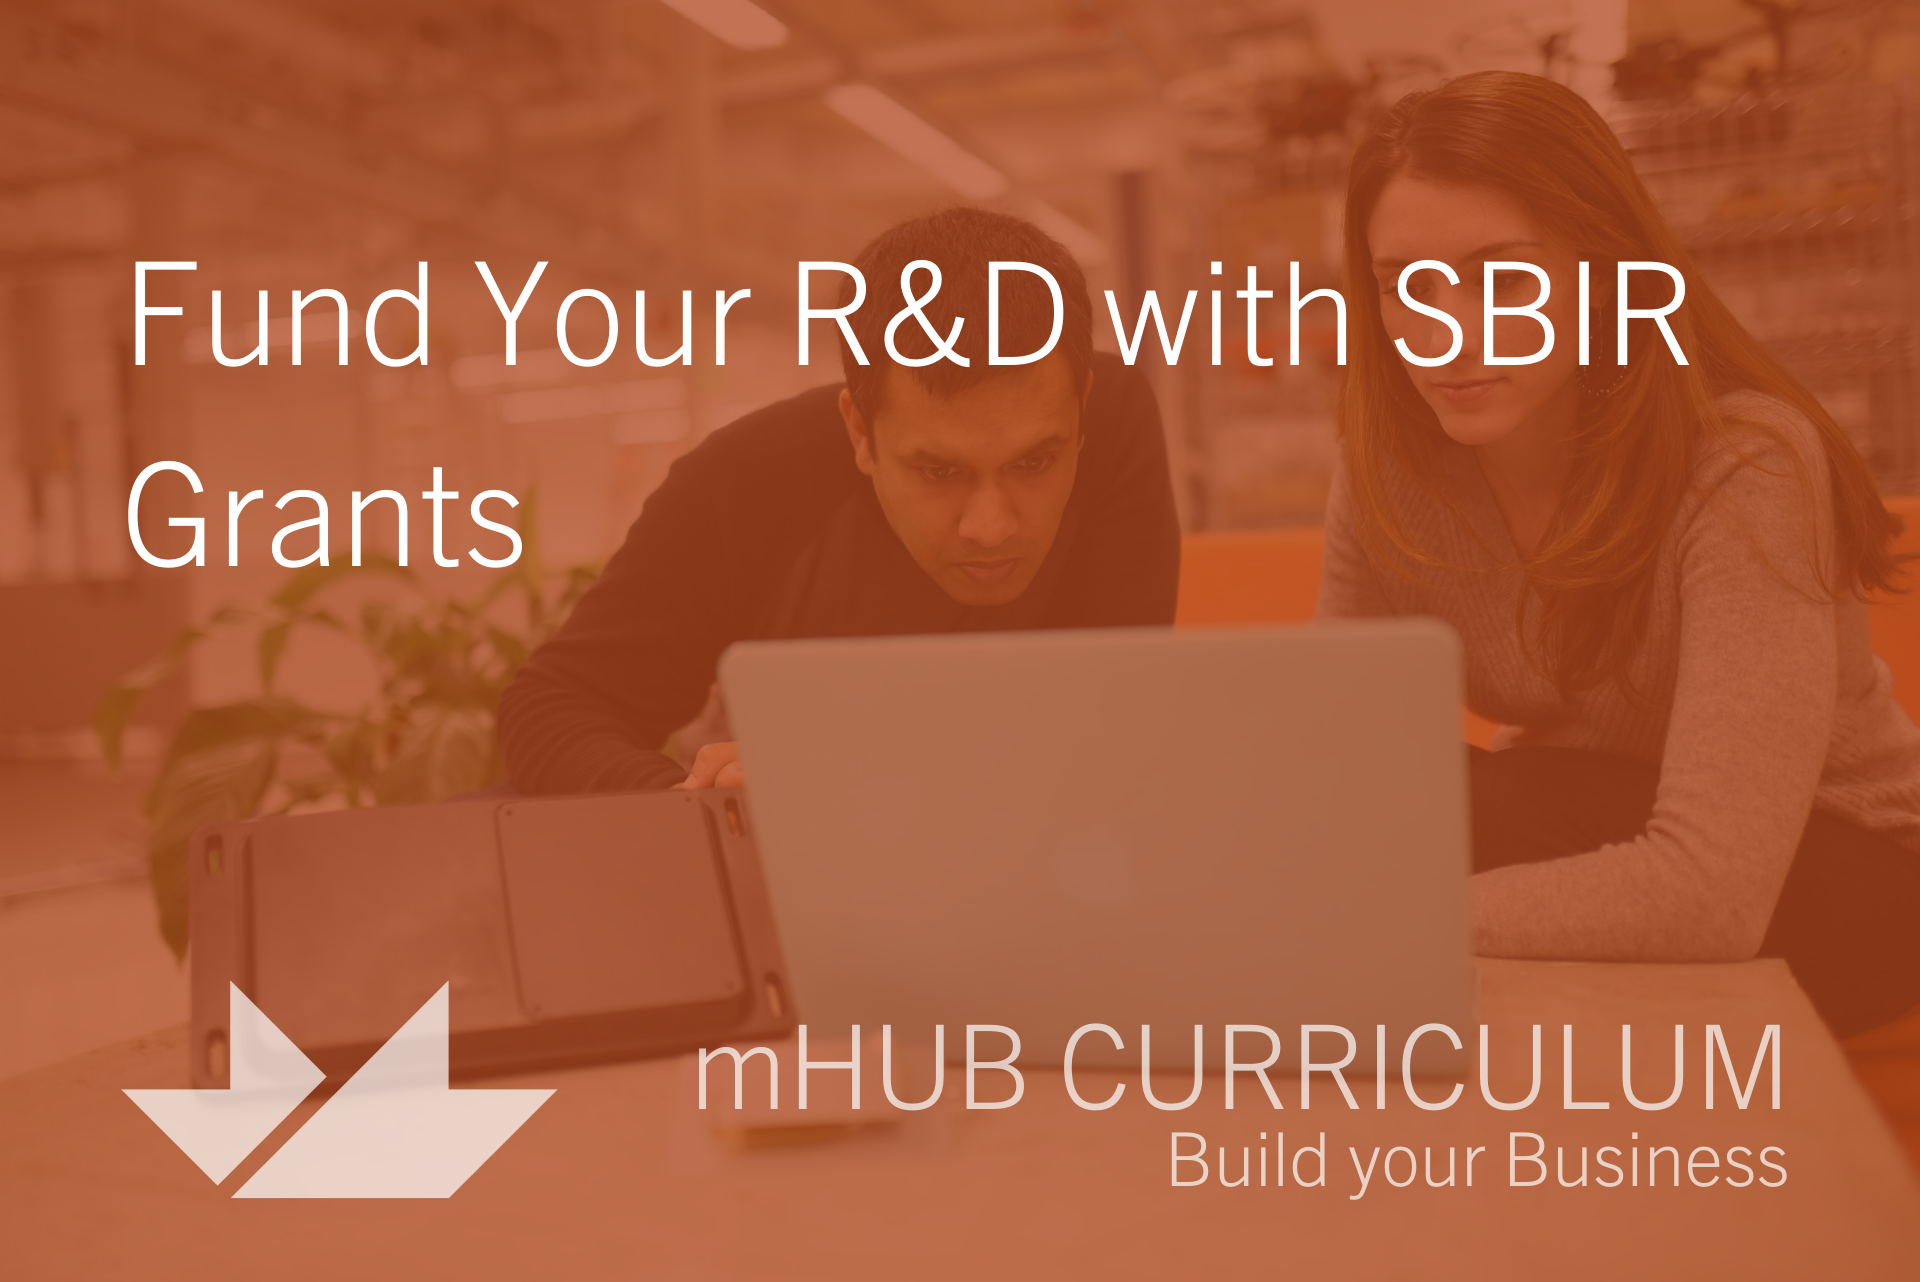 Fund Your R&D with SBIR Grants